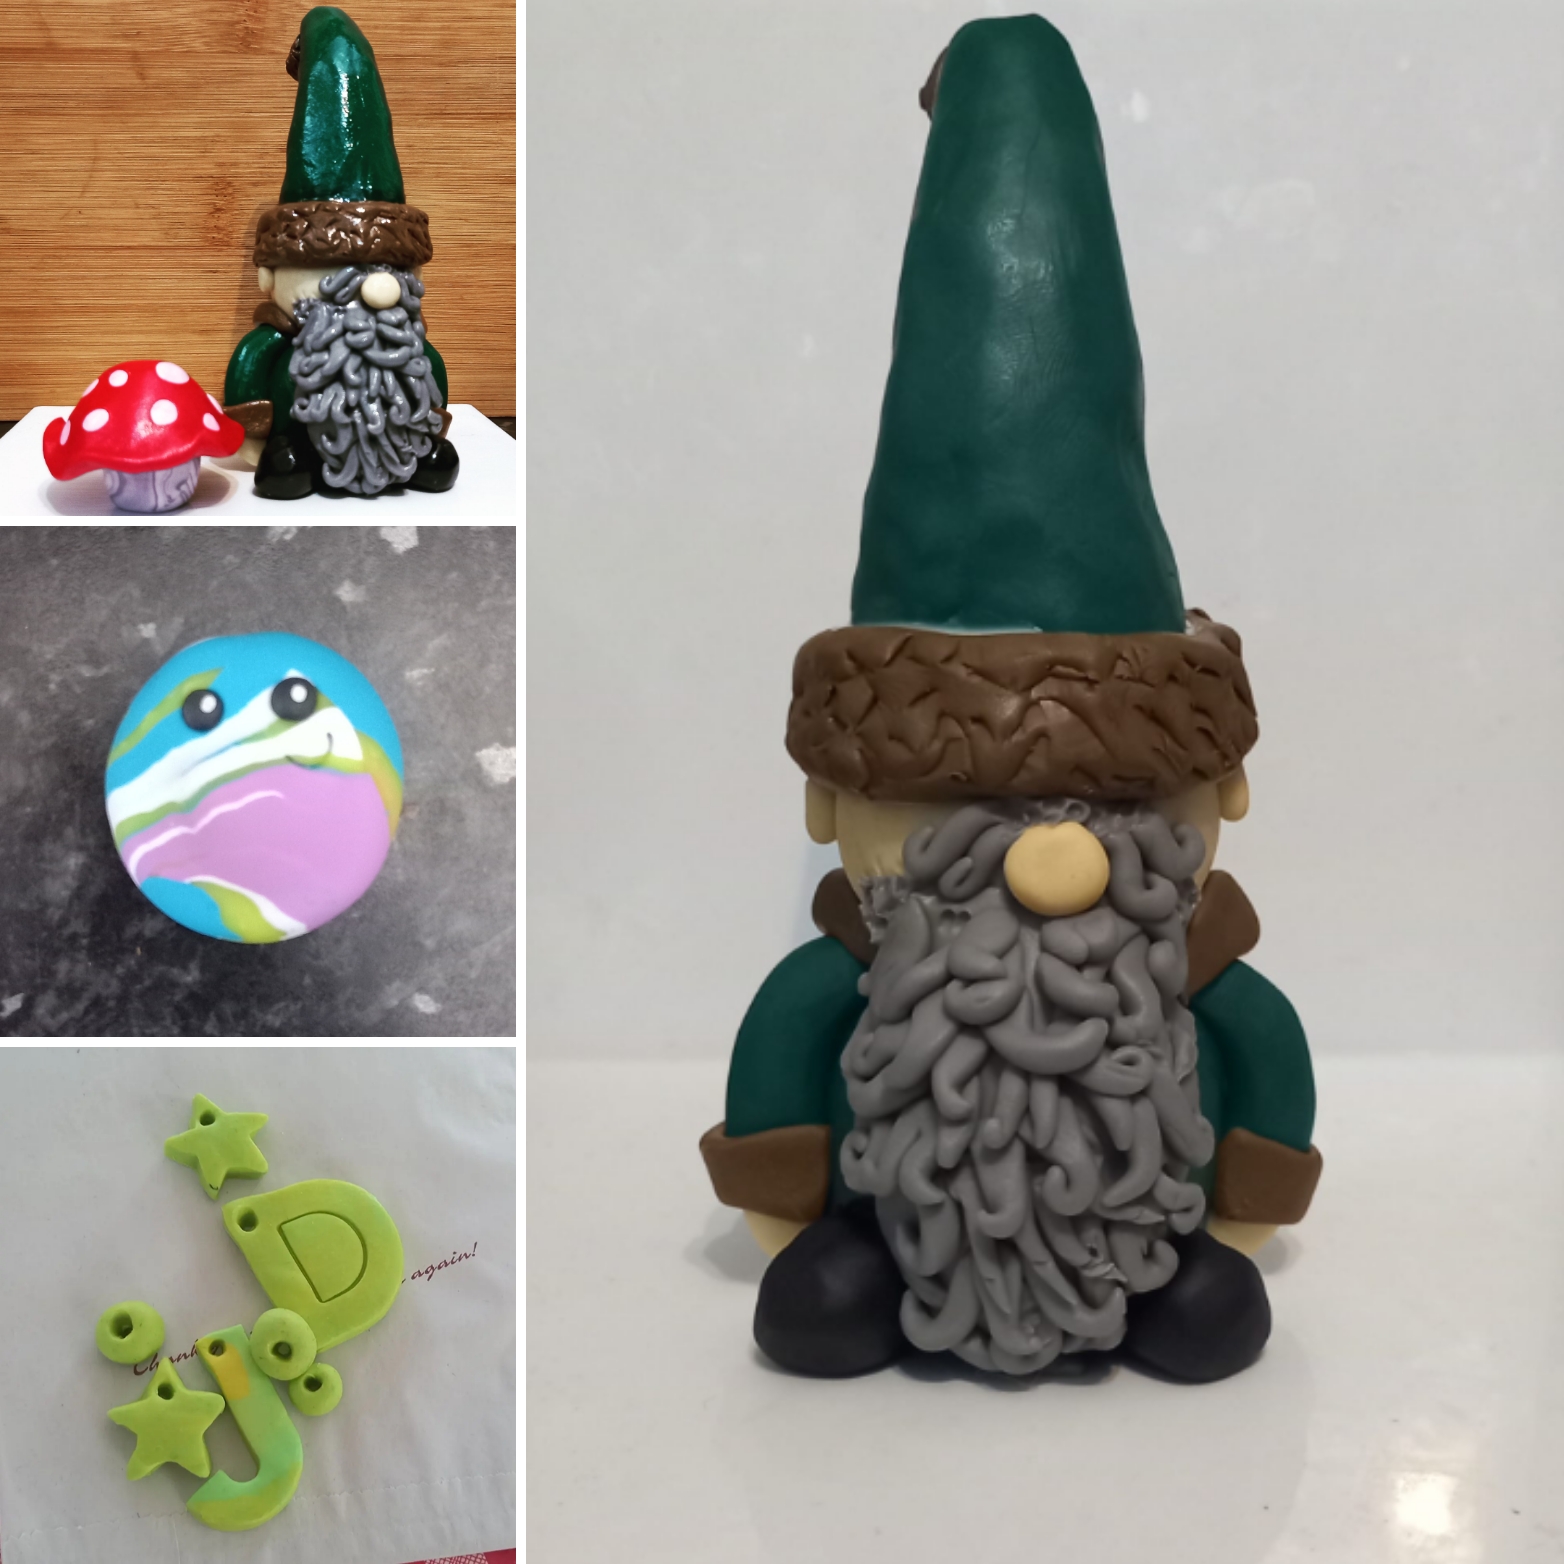 Polymer clay fidget stone, letters, a gnome and a mushroom